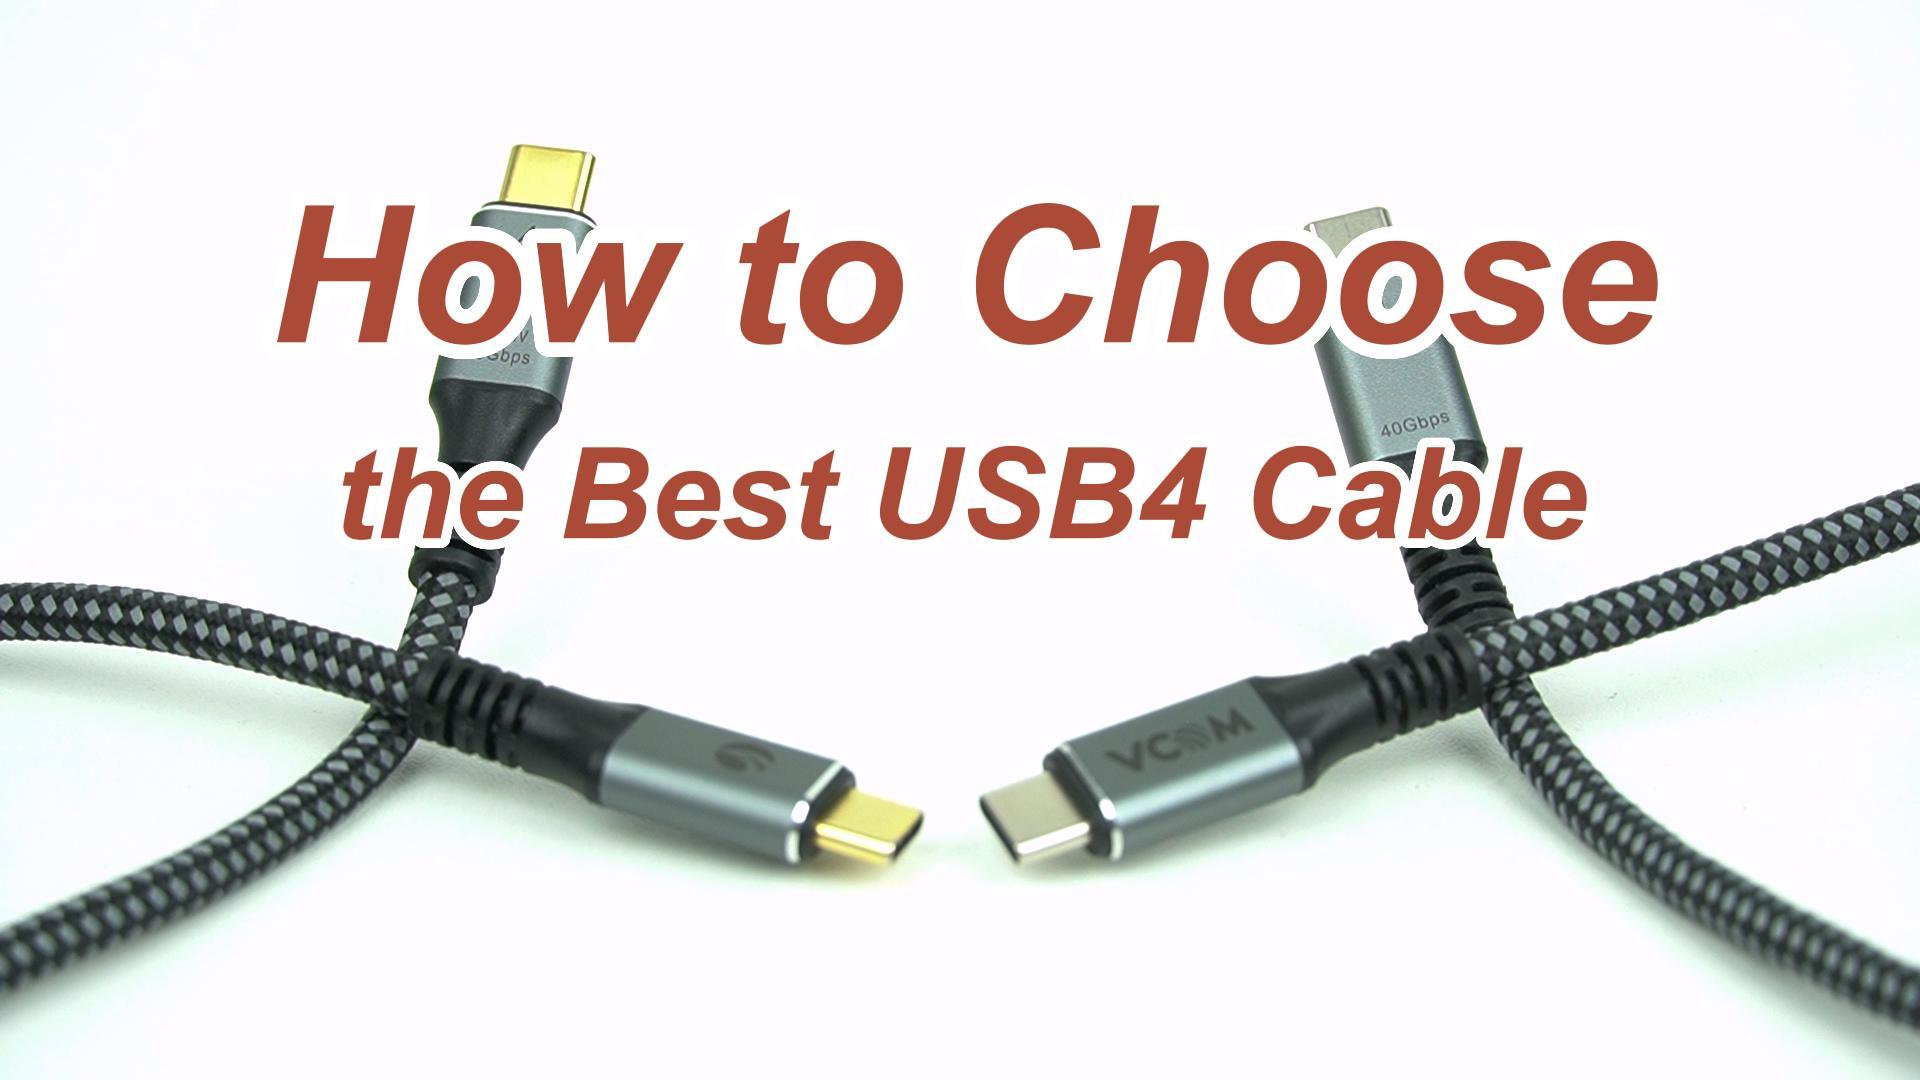 USB4 Cable Buying Guide: How to Choose the Best Cable for Lightning-Fast Data Transfer!